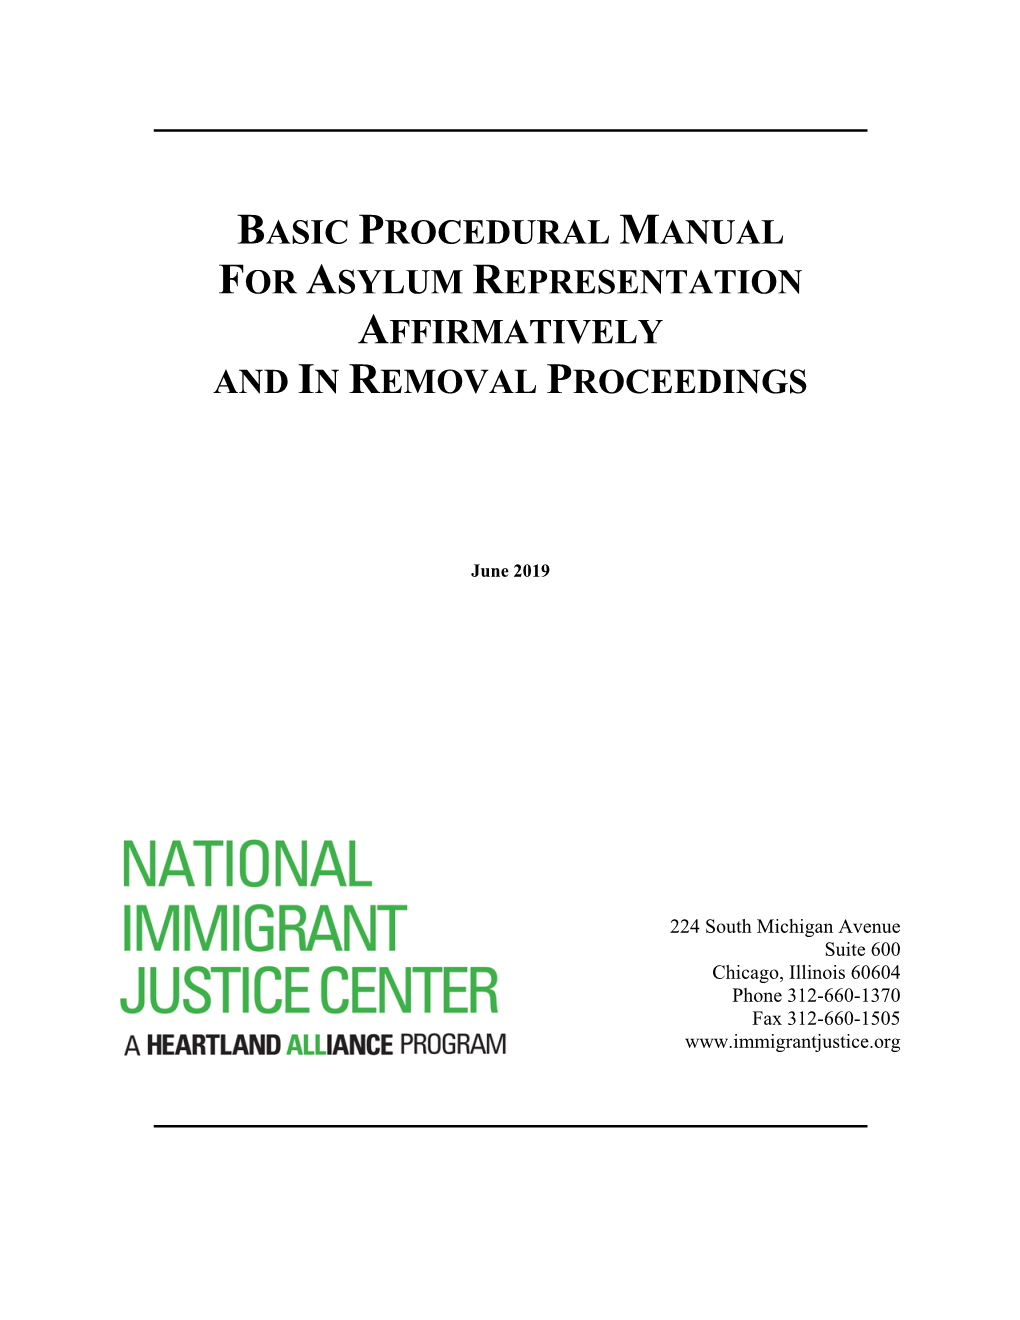 Basic Procedural Manual for Asylum Representation Affirmatively and in Removal Proceedings